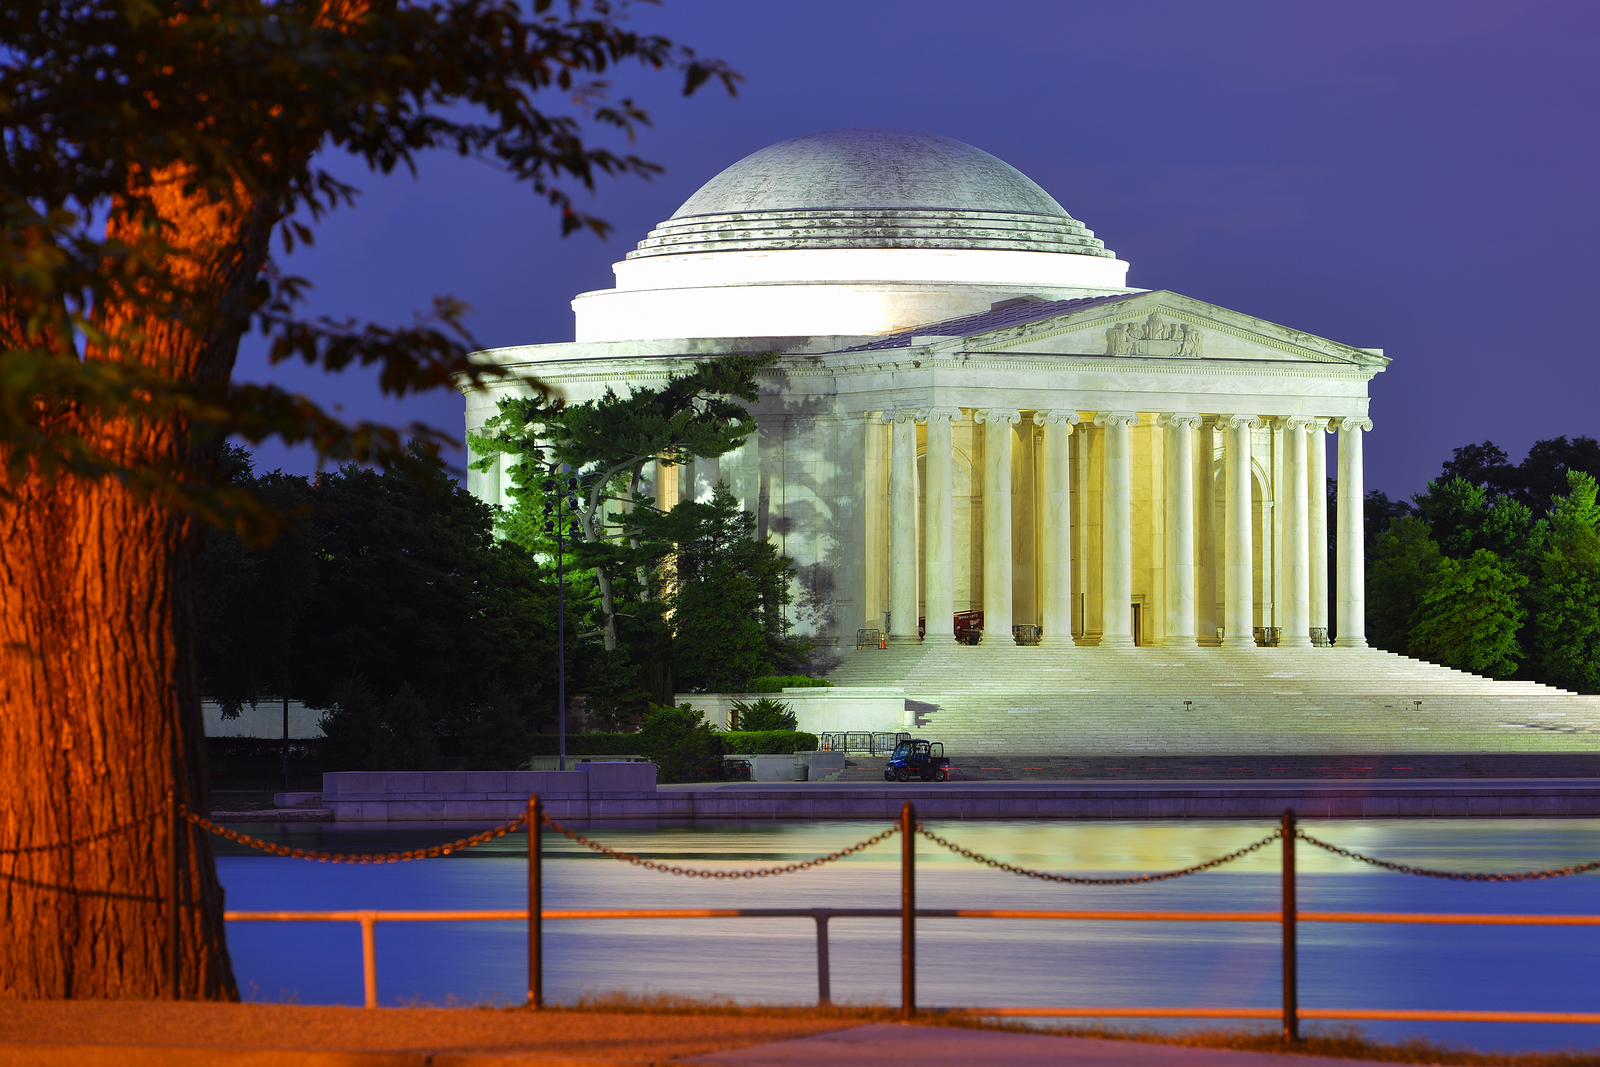 Jefferson Memorial with a dome and columns